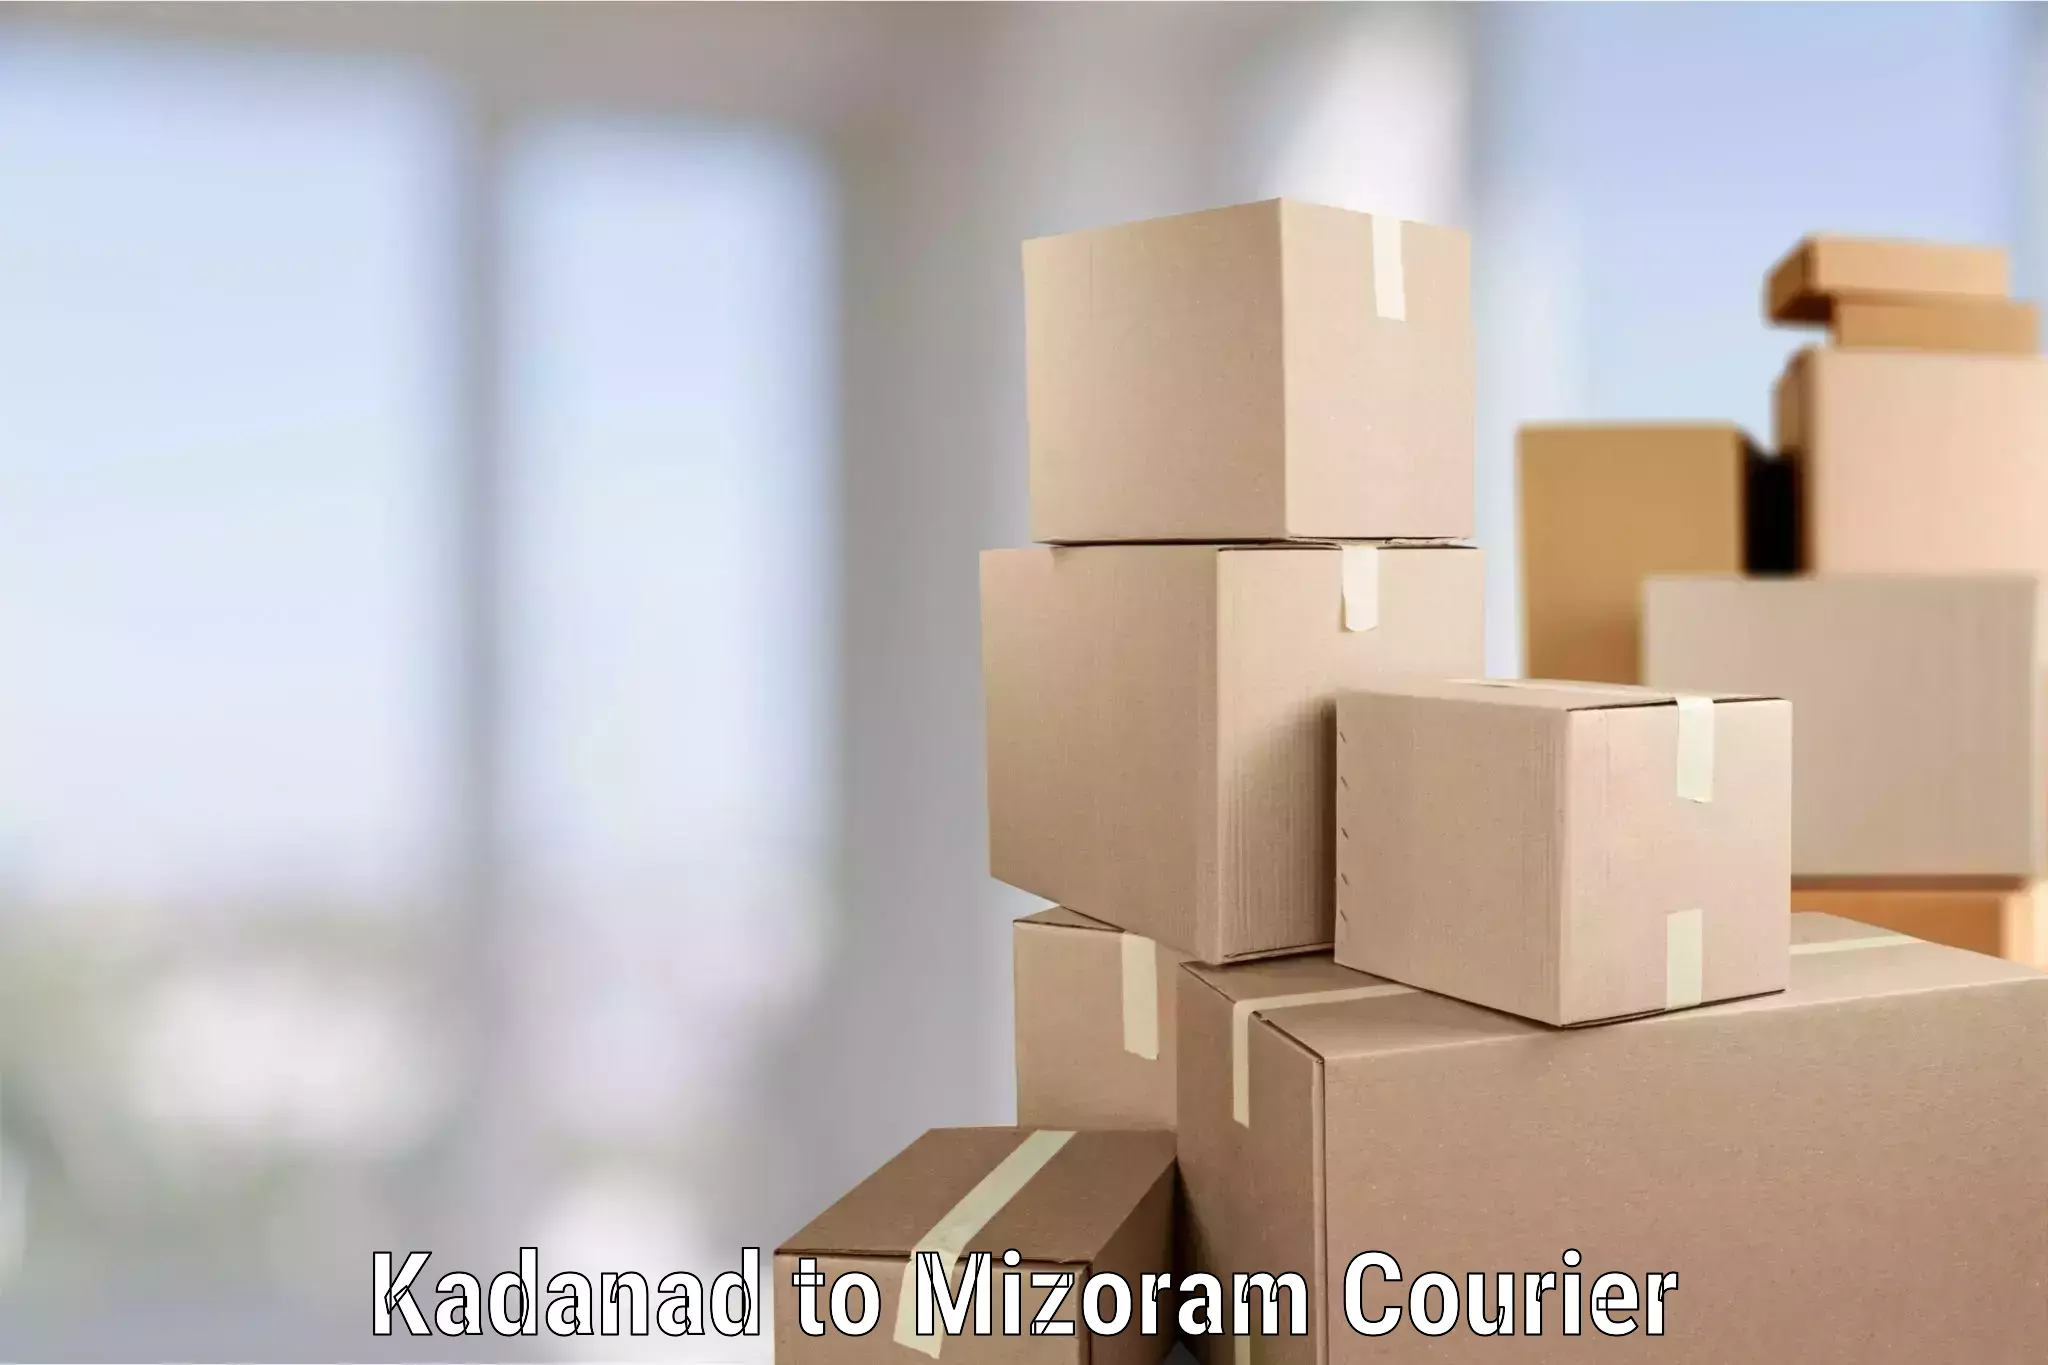 Trusted relocation experts Kadanad to Darlawn